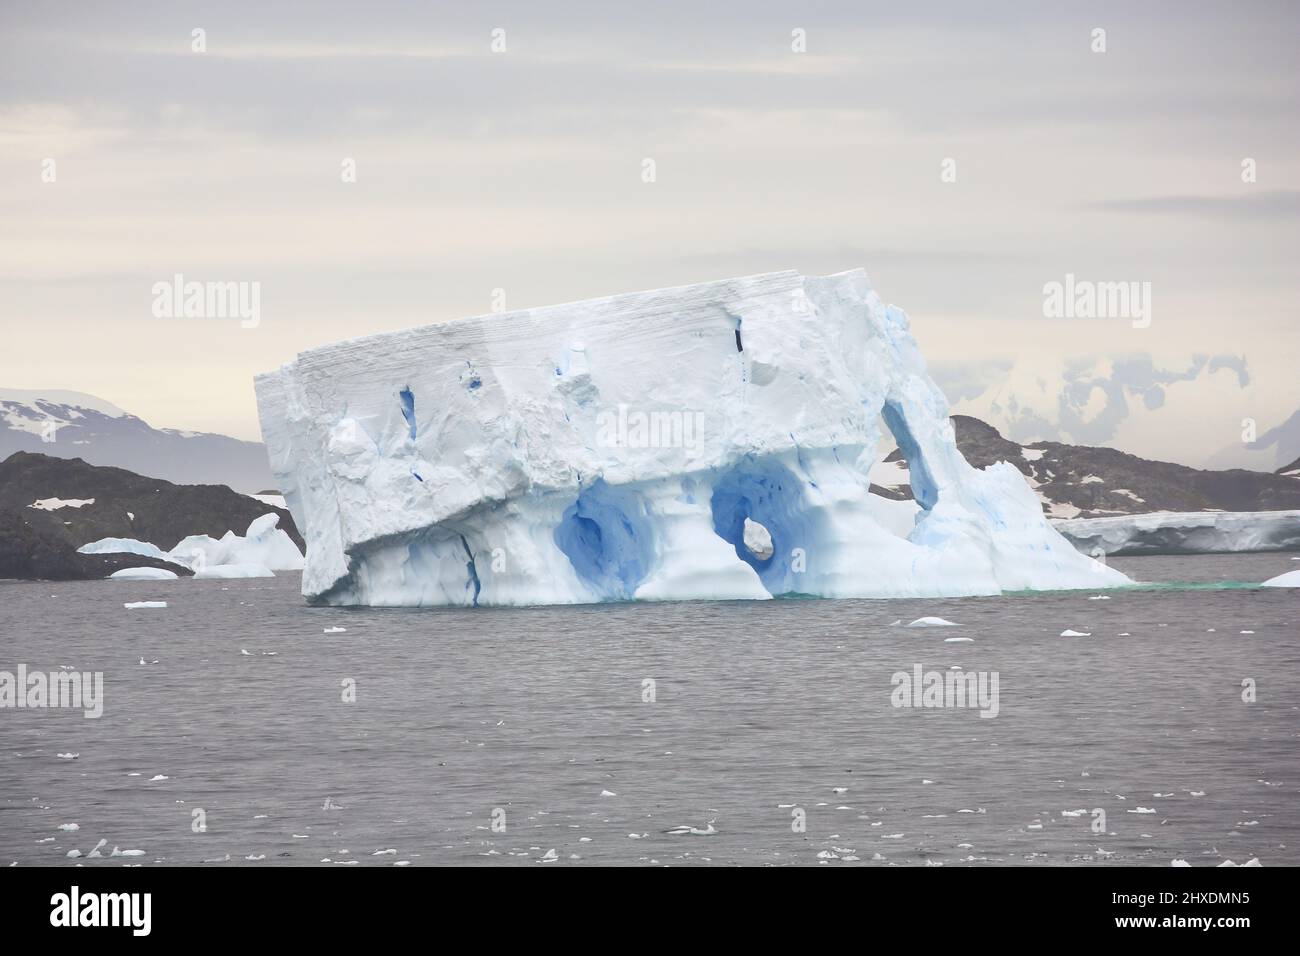 A large iceberg in the Wilhelm Archipelago region of the Antarctic Peninsula. Several caverns and holes have developed through the iceberg. Stock Photo